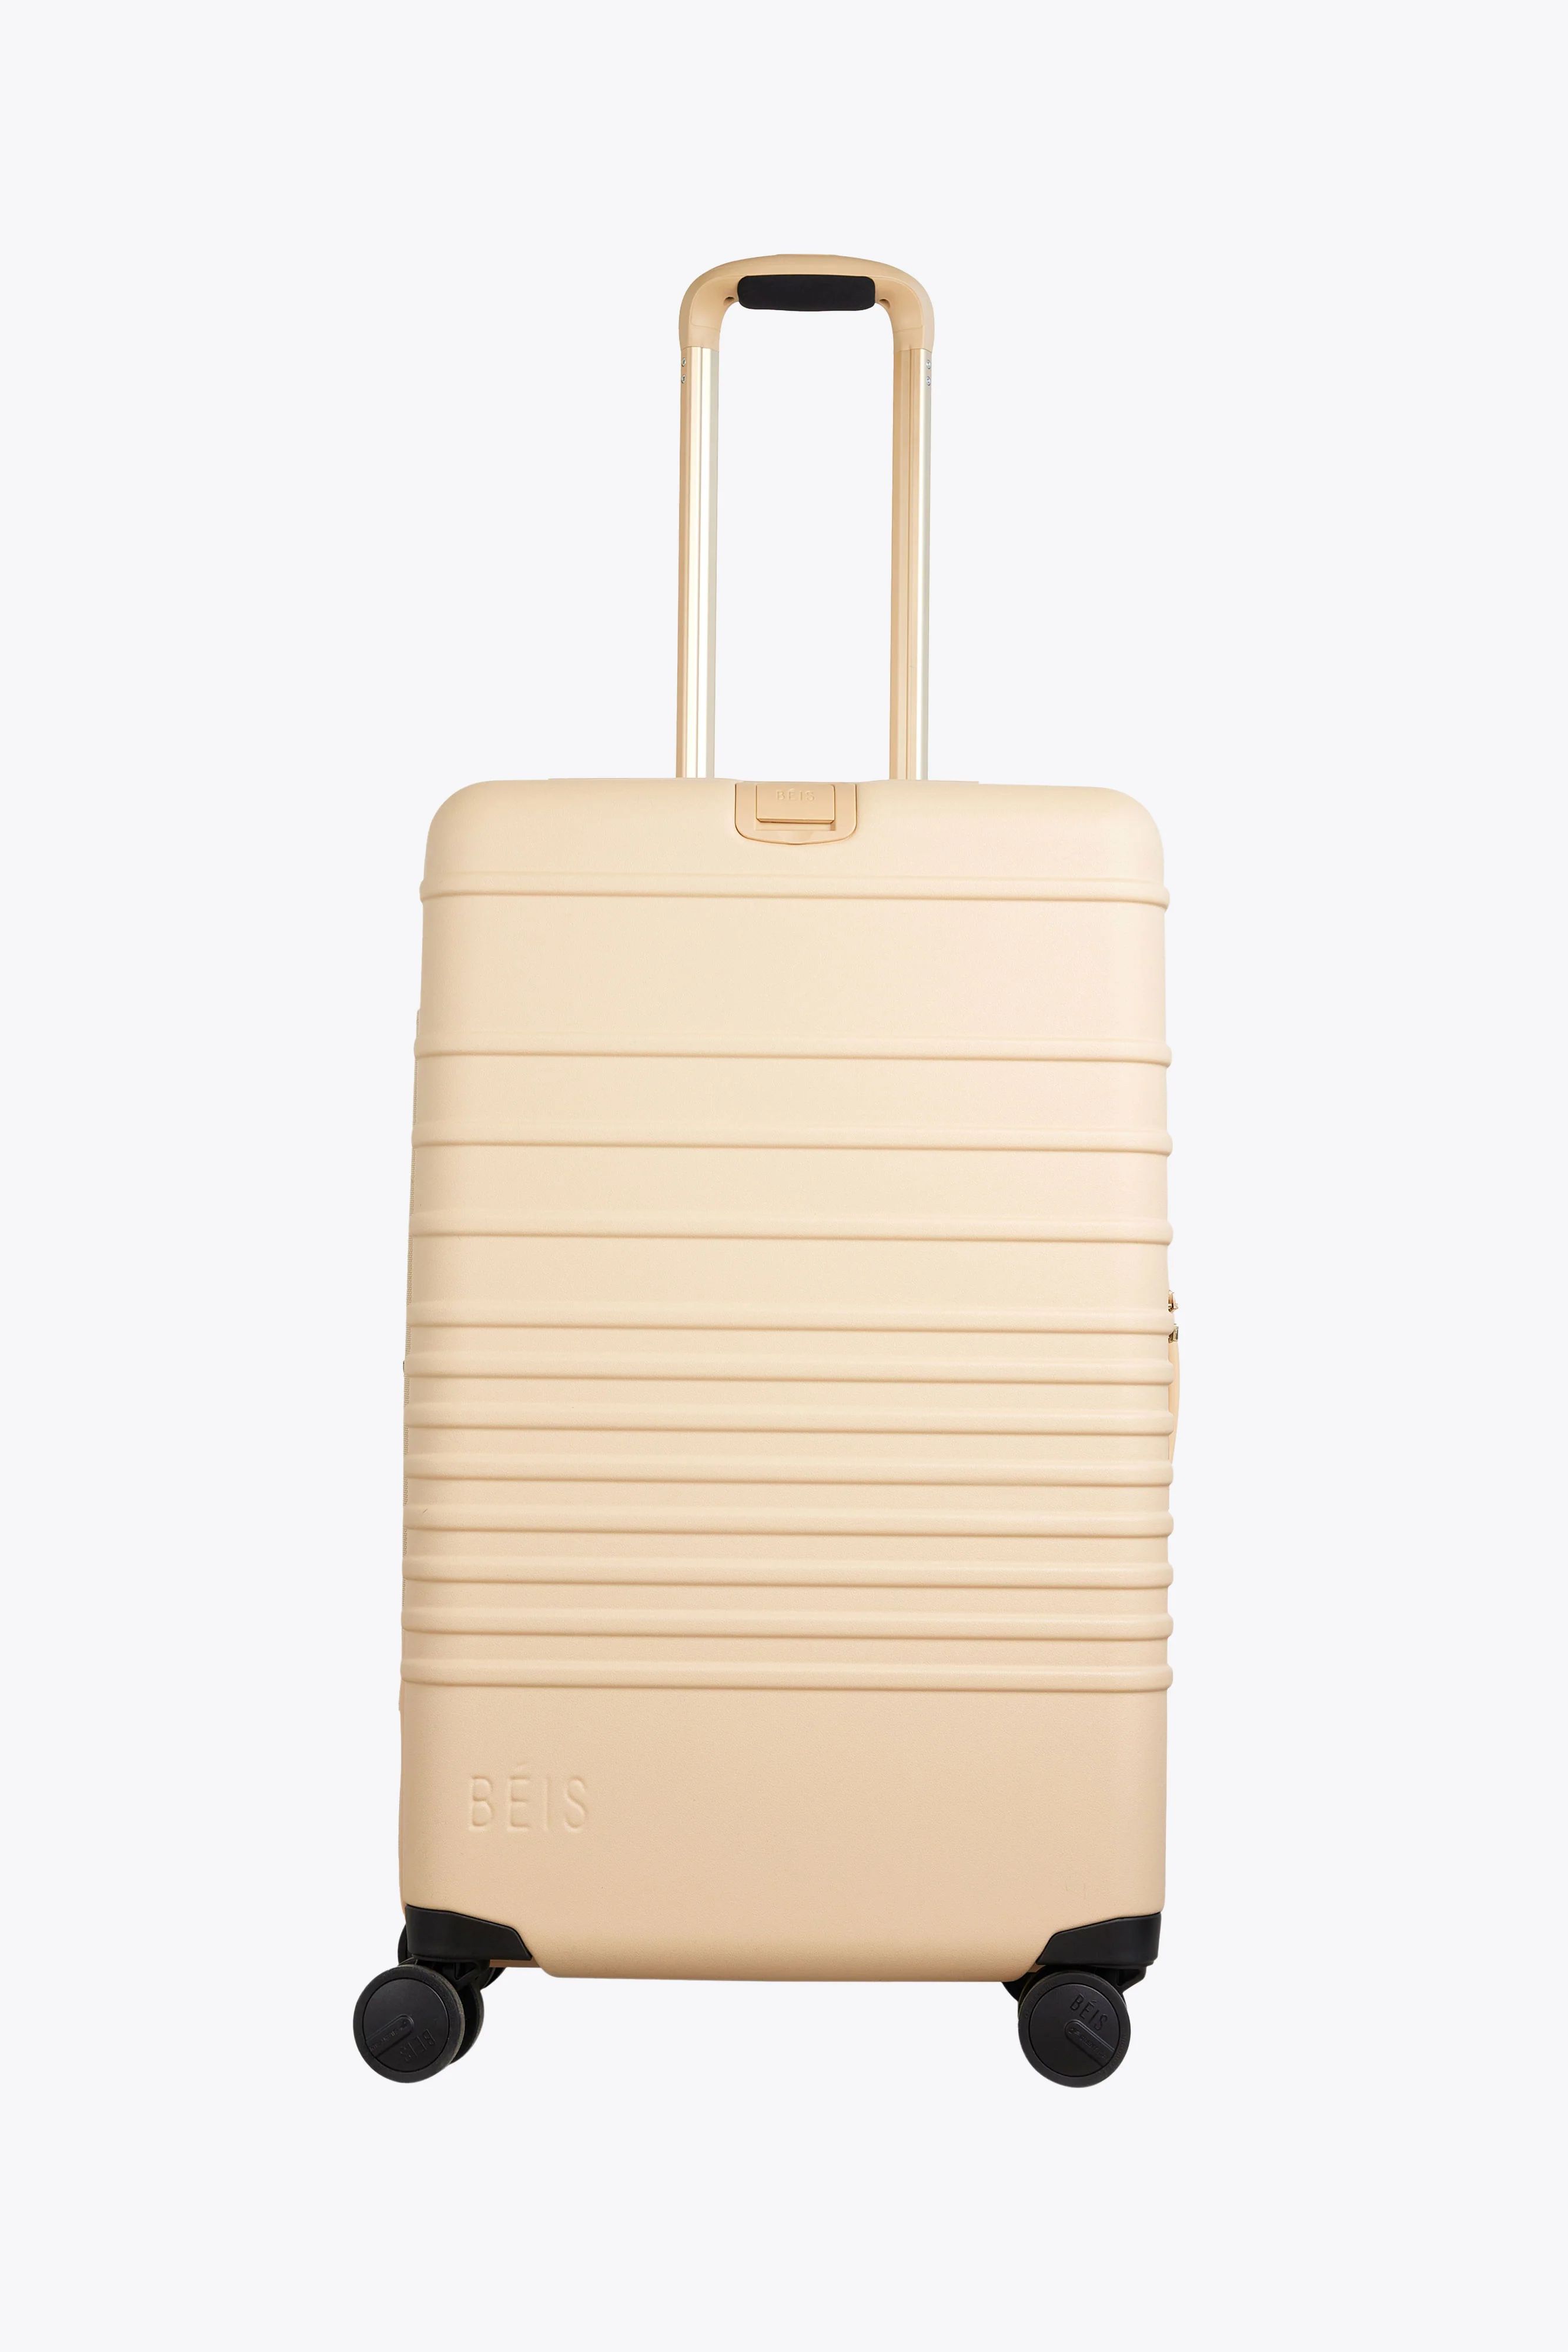 BÉIS 'The Medium Check-In Roller' in Beige - 26 In Rolling Luggage & Suitcase | BÉIS Travel